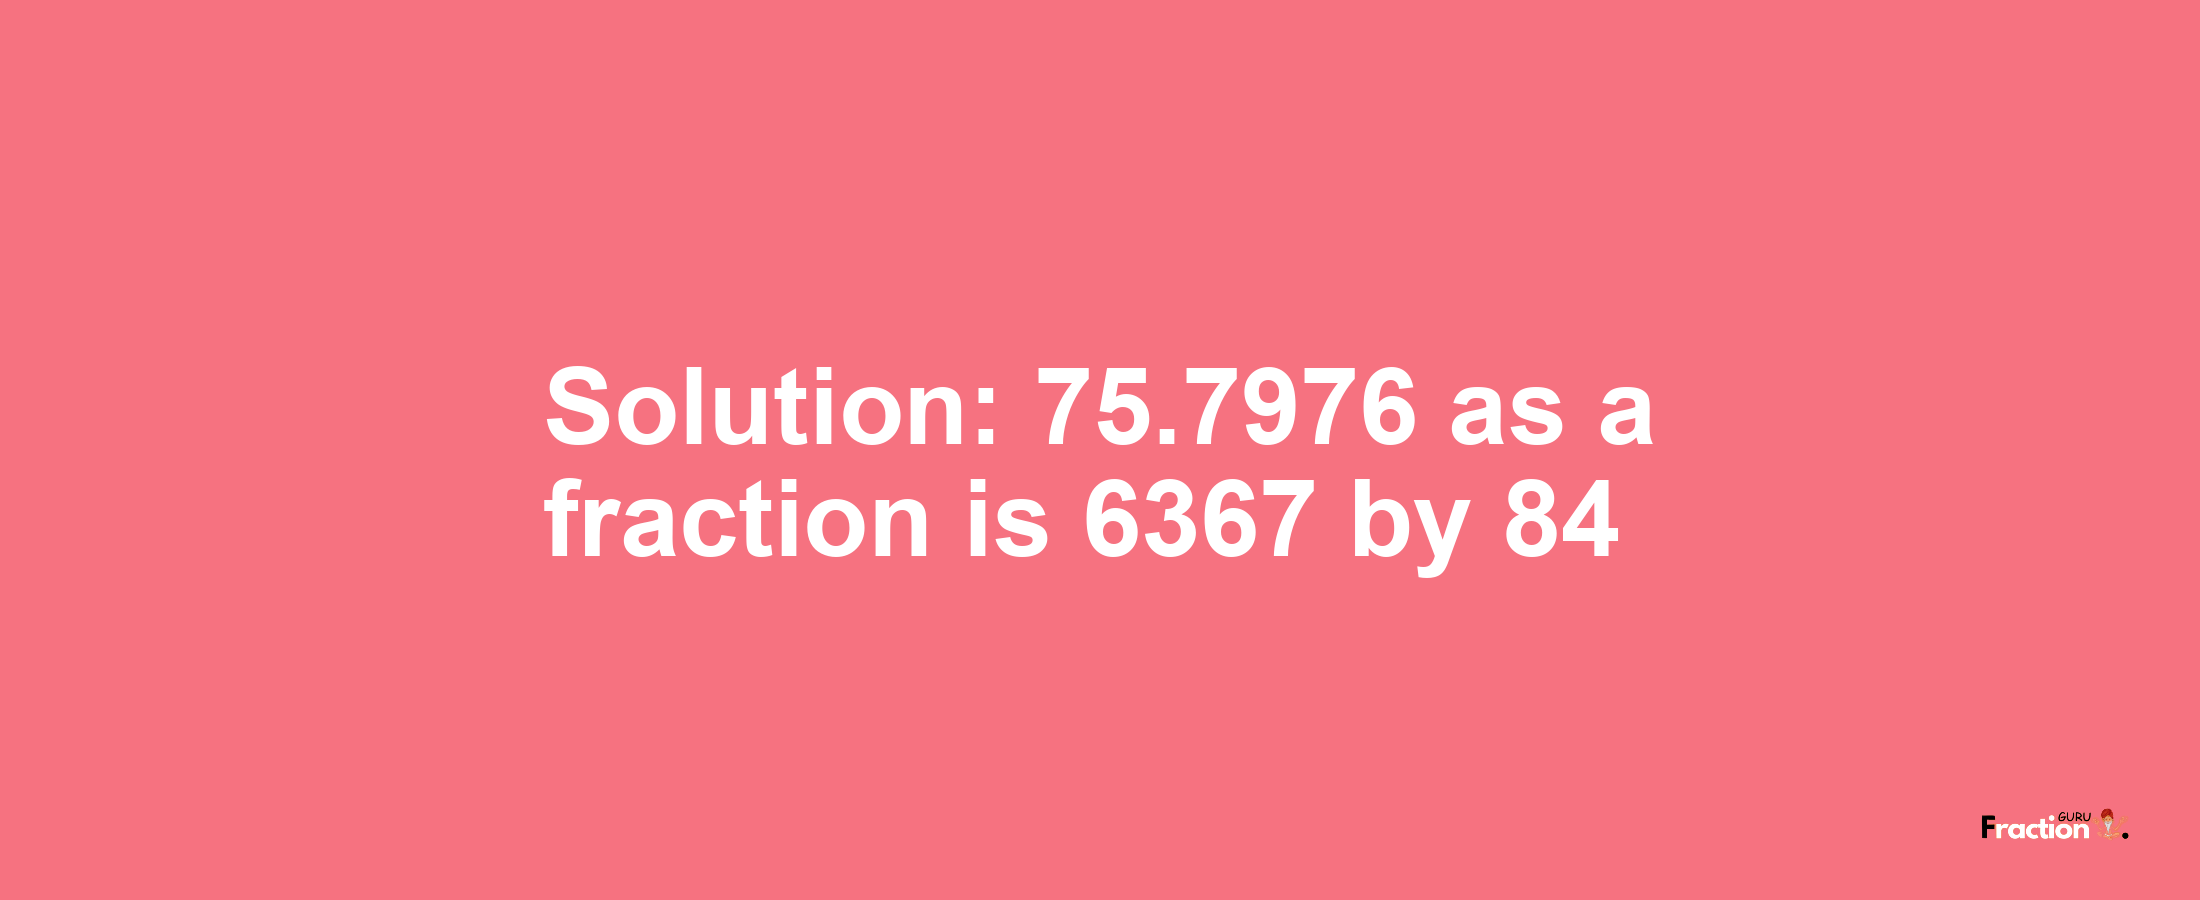 Solution:75.7976 as a fraction is 6367/84